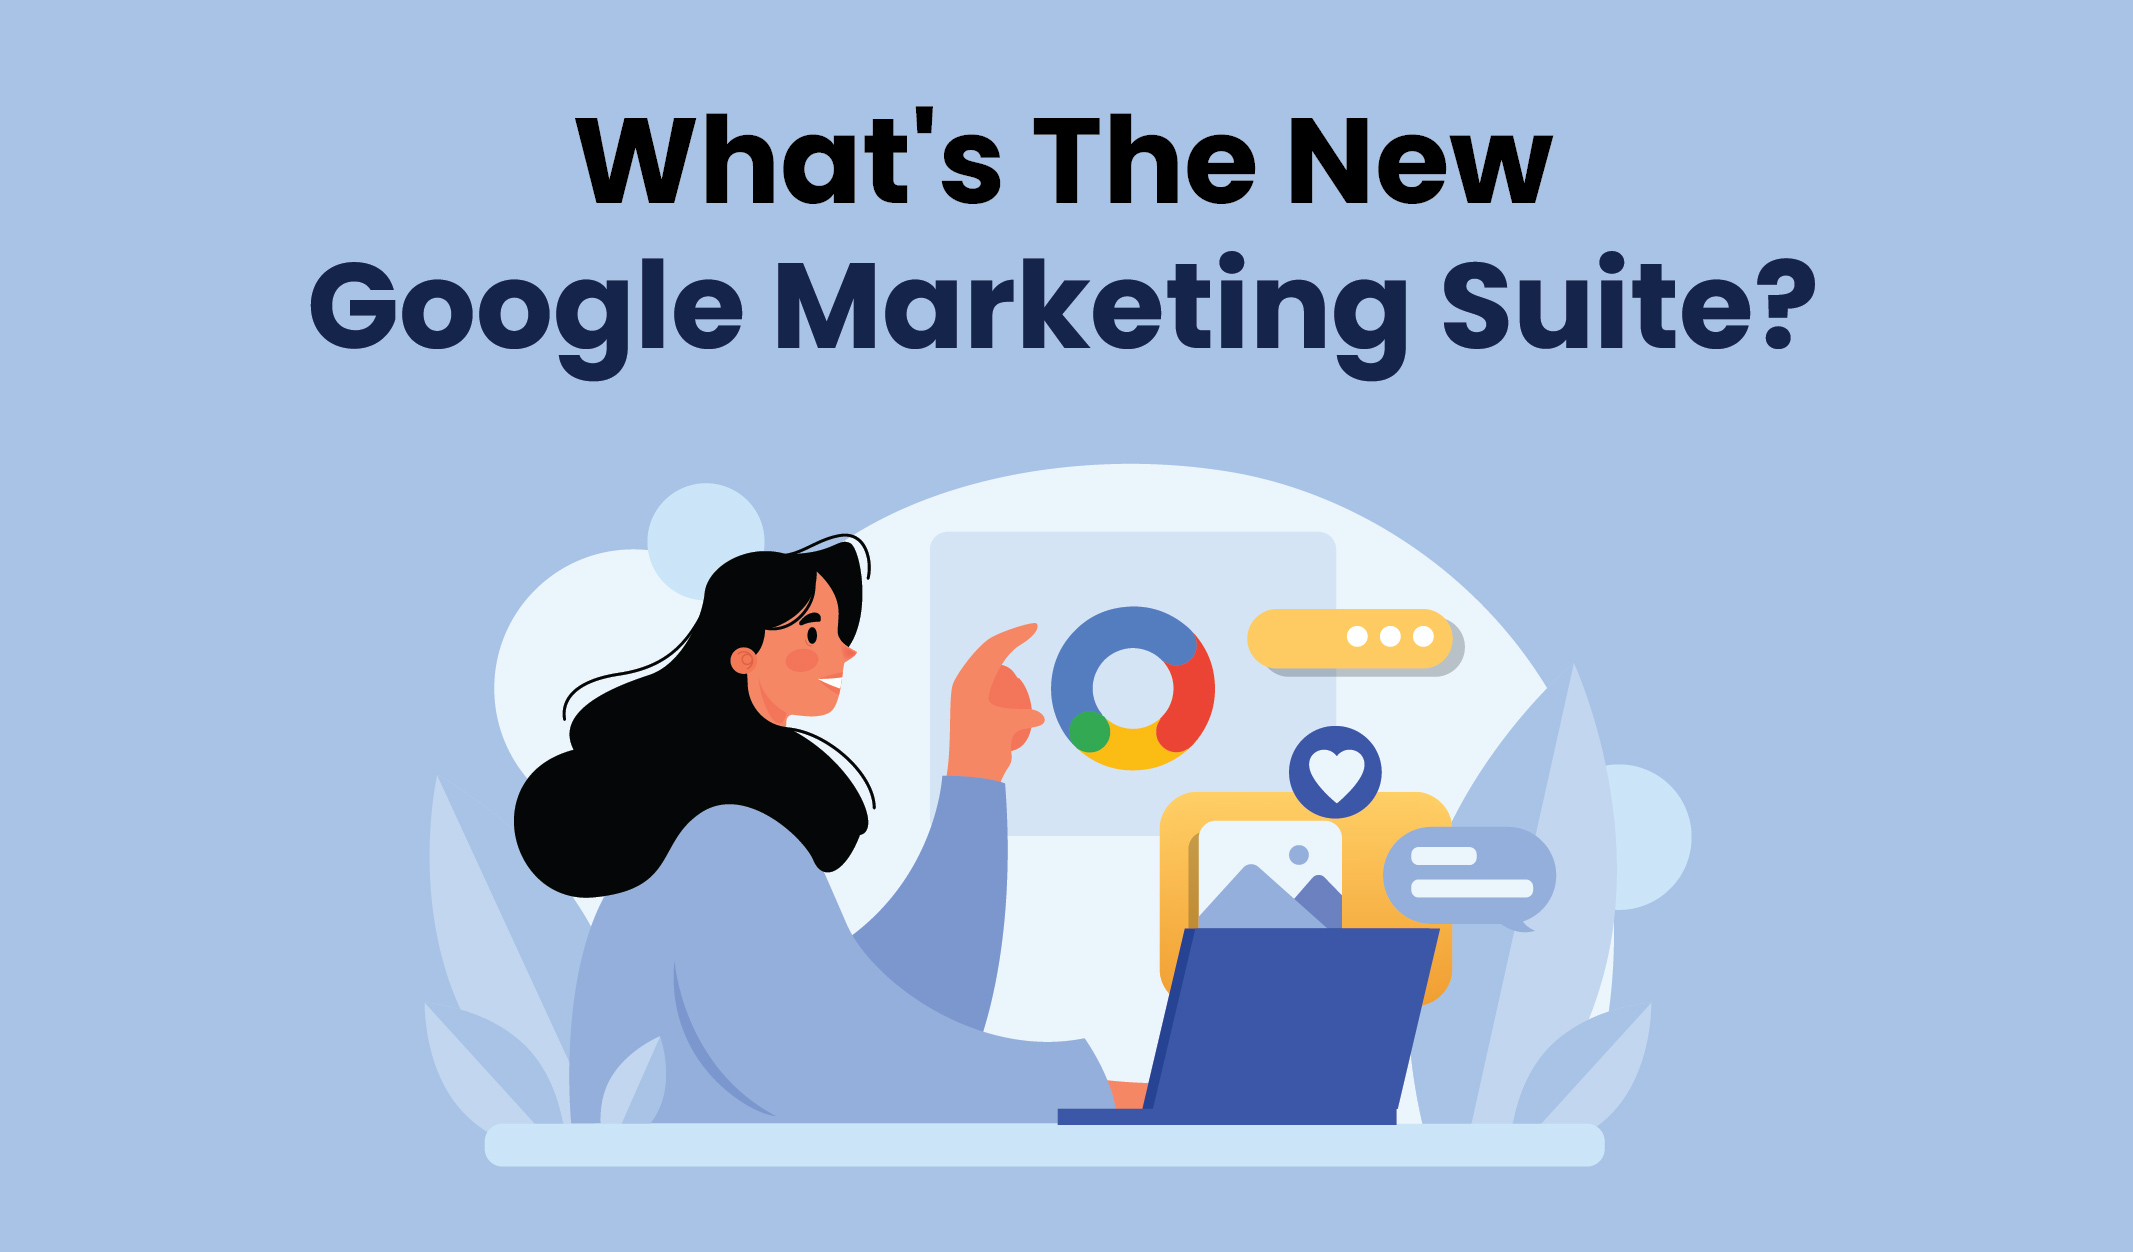 What’s the new Google Marketing Suite?